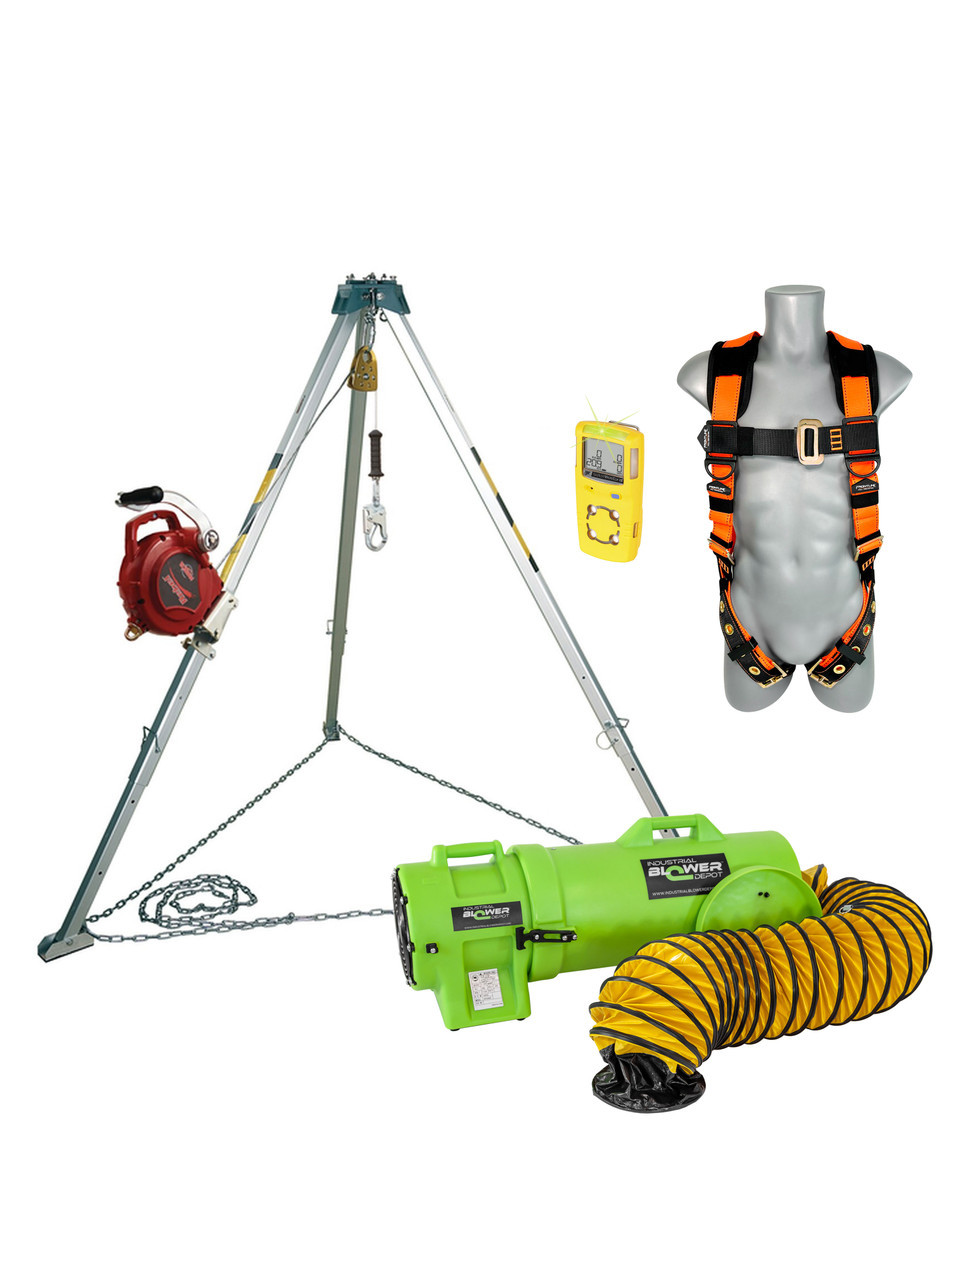 3M Protecta Premium Confined Space Kit Rescue System Complete Safety  Compliant - Industrial Safety Products